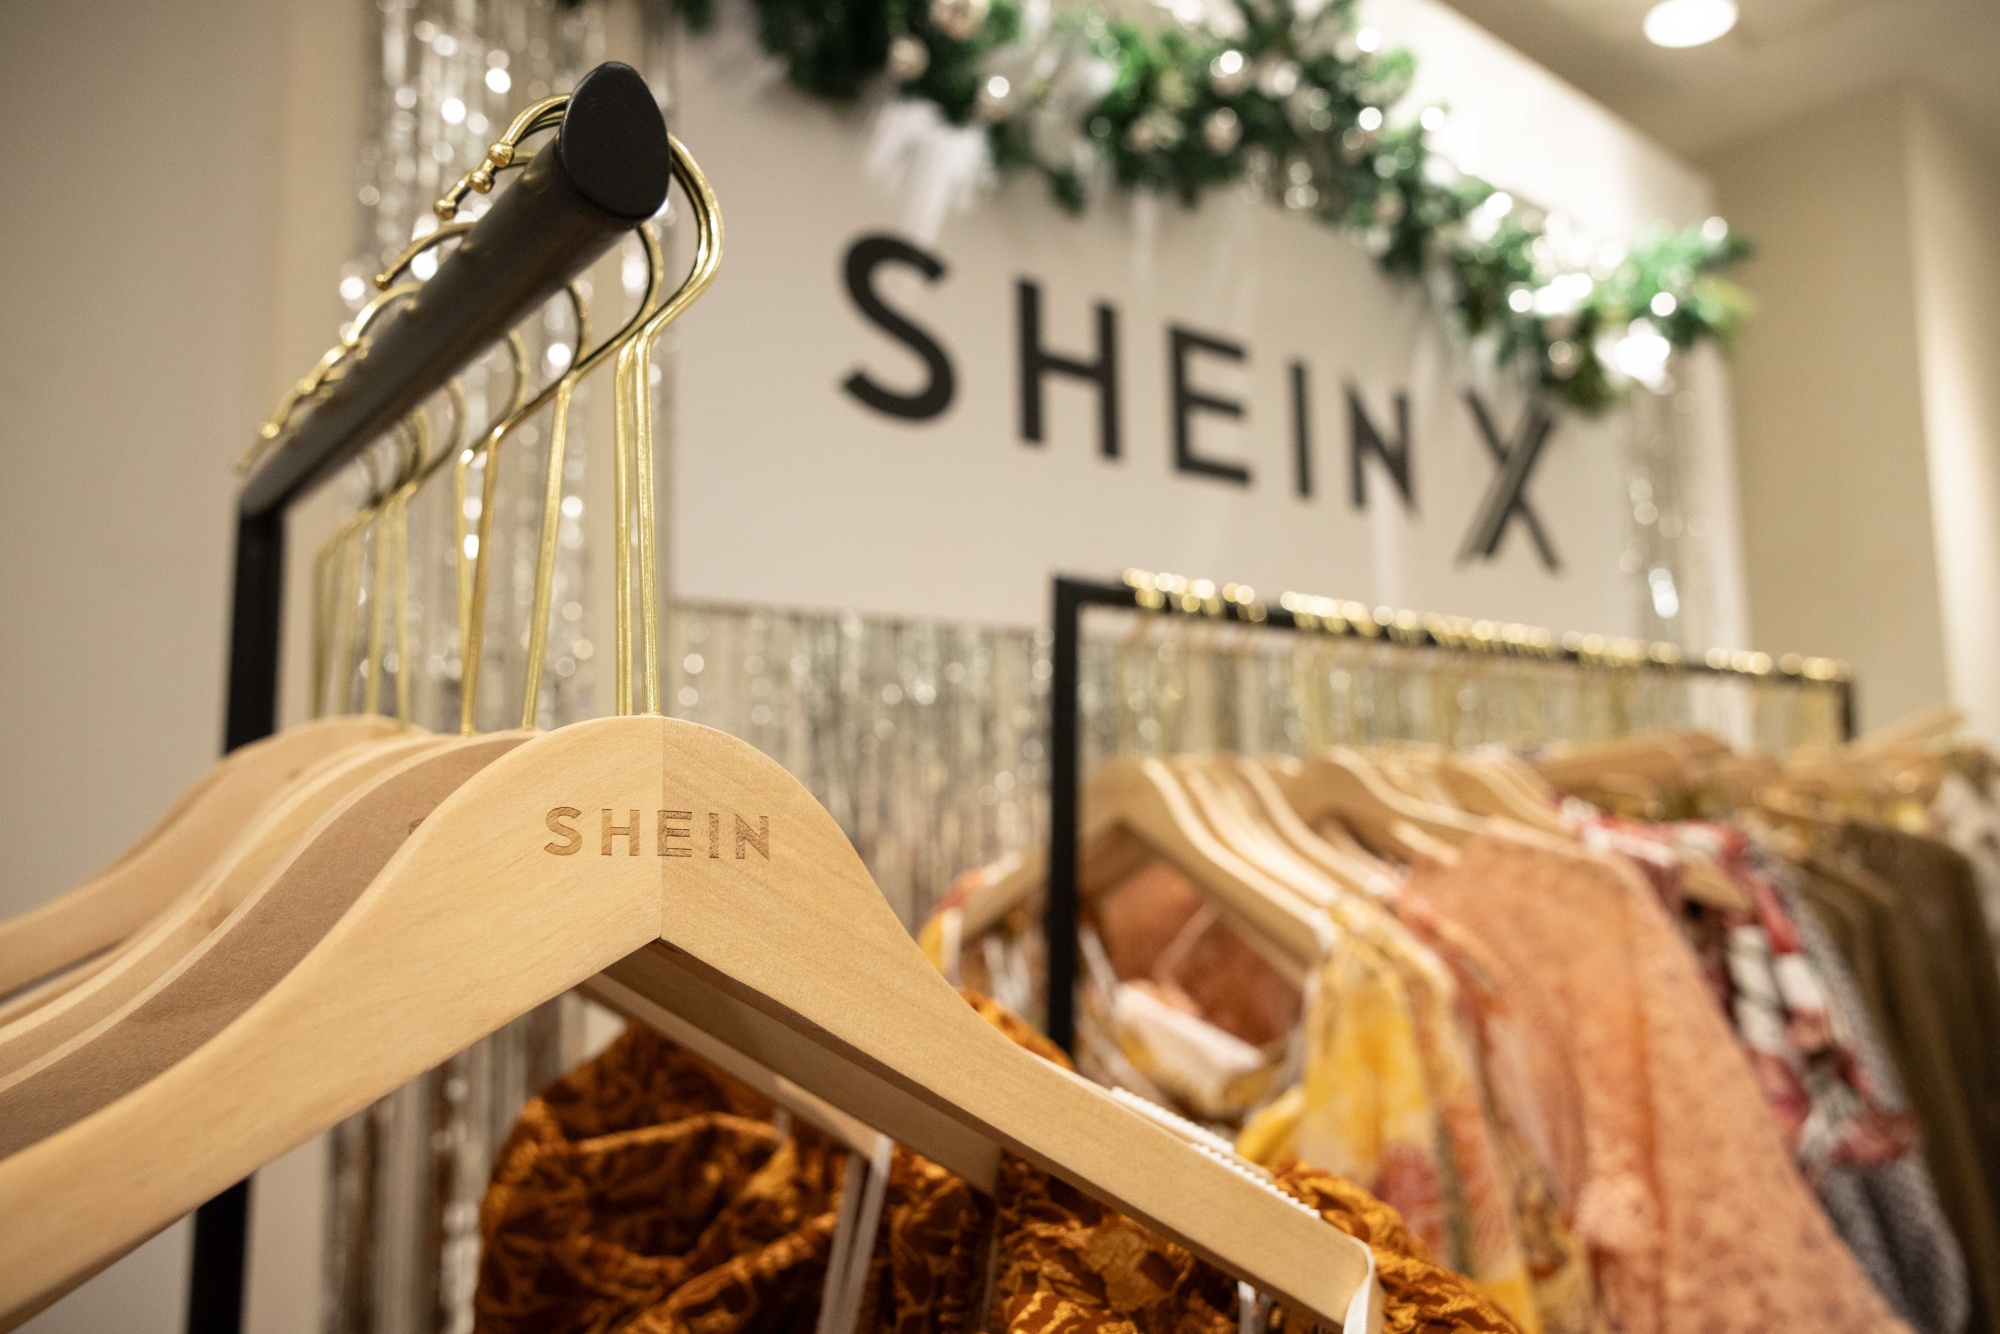 When Push Comes to Shove With Shein, Amazon Does Cut Prices - Bloomberg